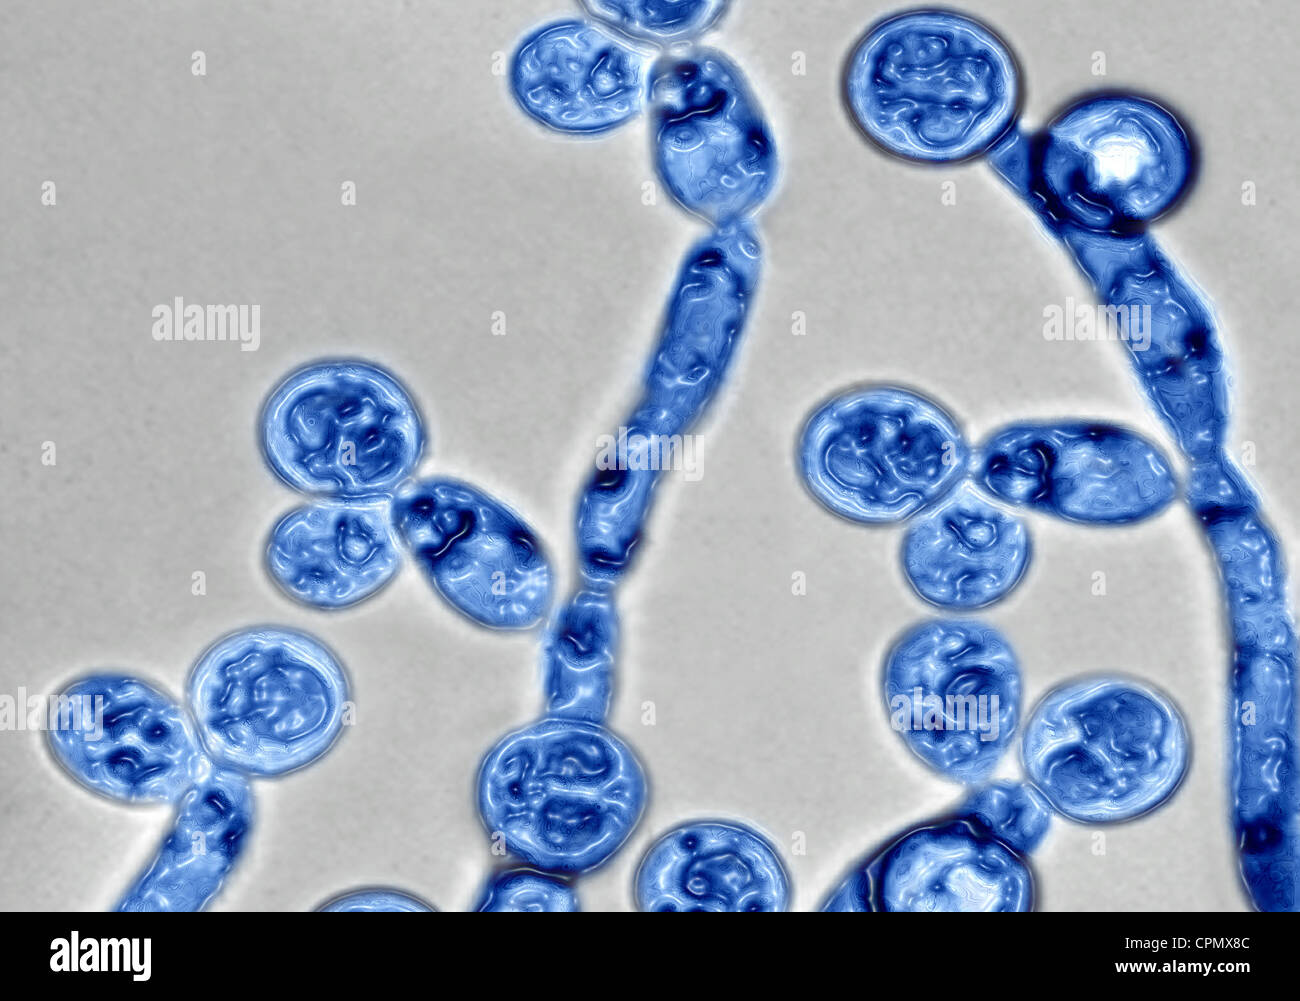 CANDIDA ALBICANS Stock Photo - Alamy